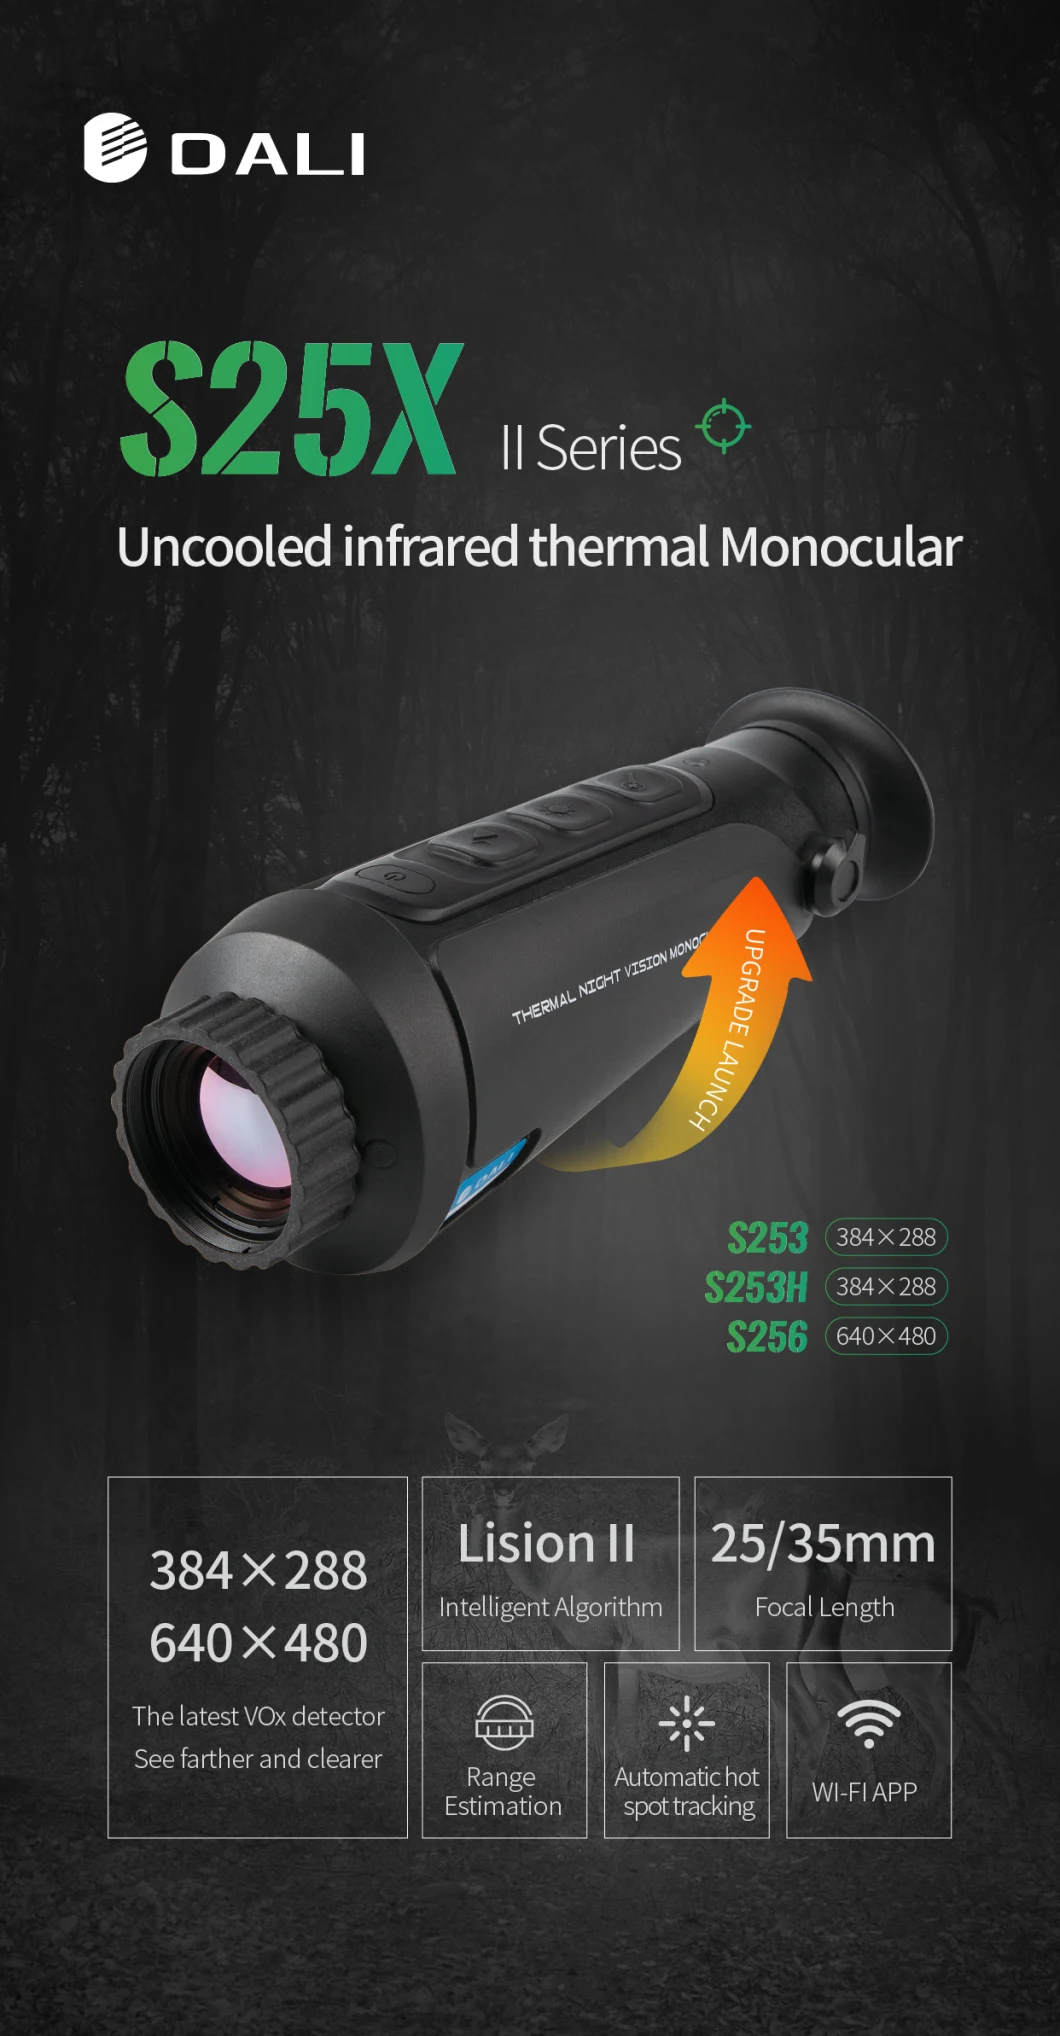 Dali Hot Sale Night Vision Outdoor Infrared Camera Thermal Imaging Monocular for Hunting Patrol Security